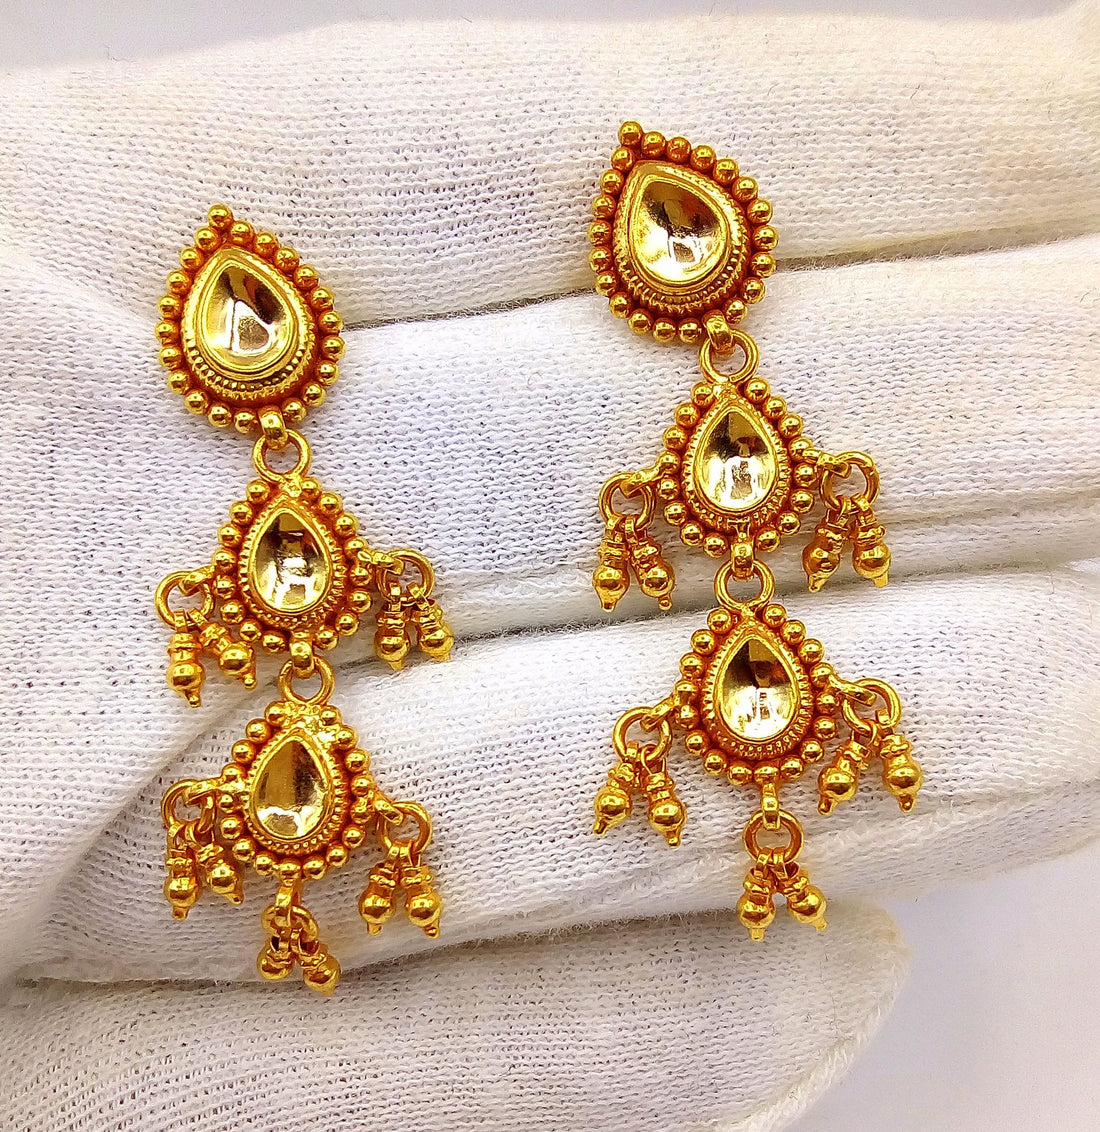 Vintage antique fabulous 22karat yellow gold handmade tussi designer earrings women's tribal jewelry from rajasthan India - TRIBAL ORNAMENTS